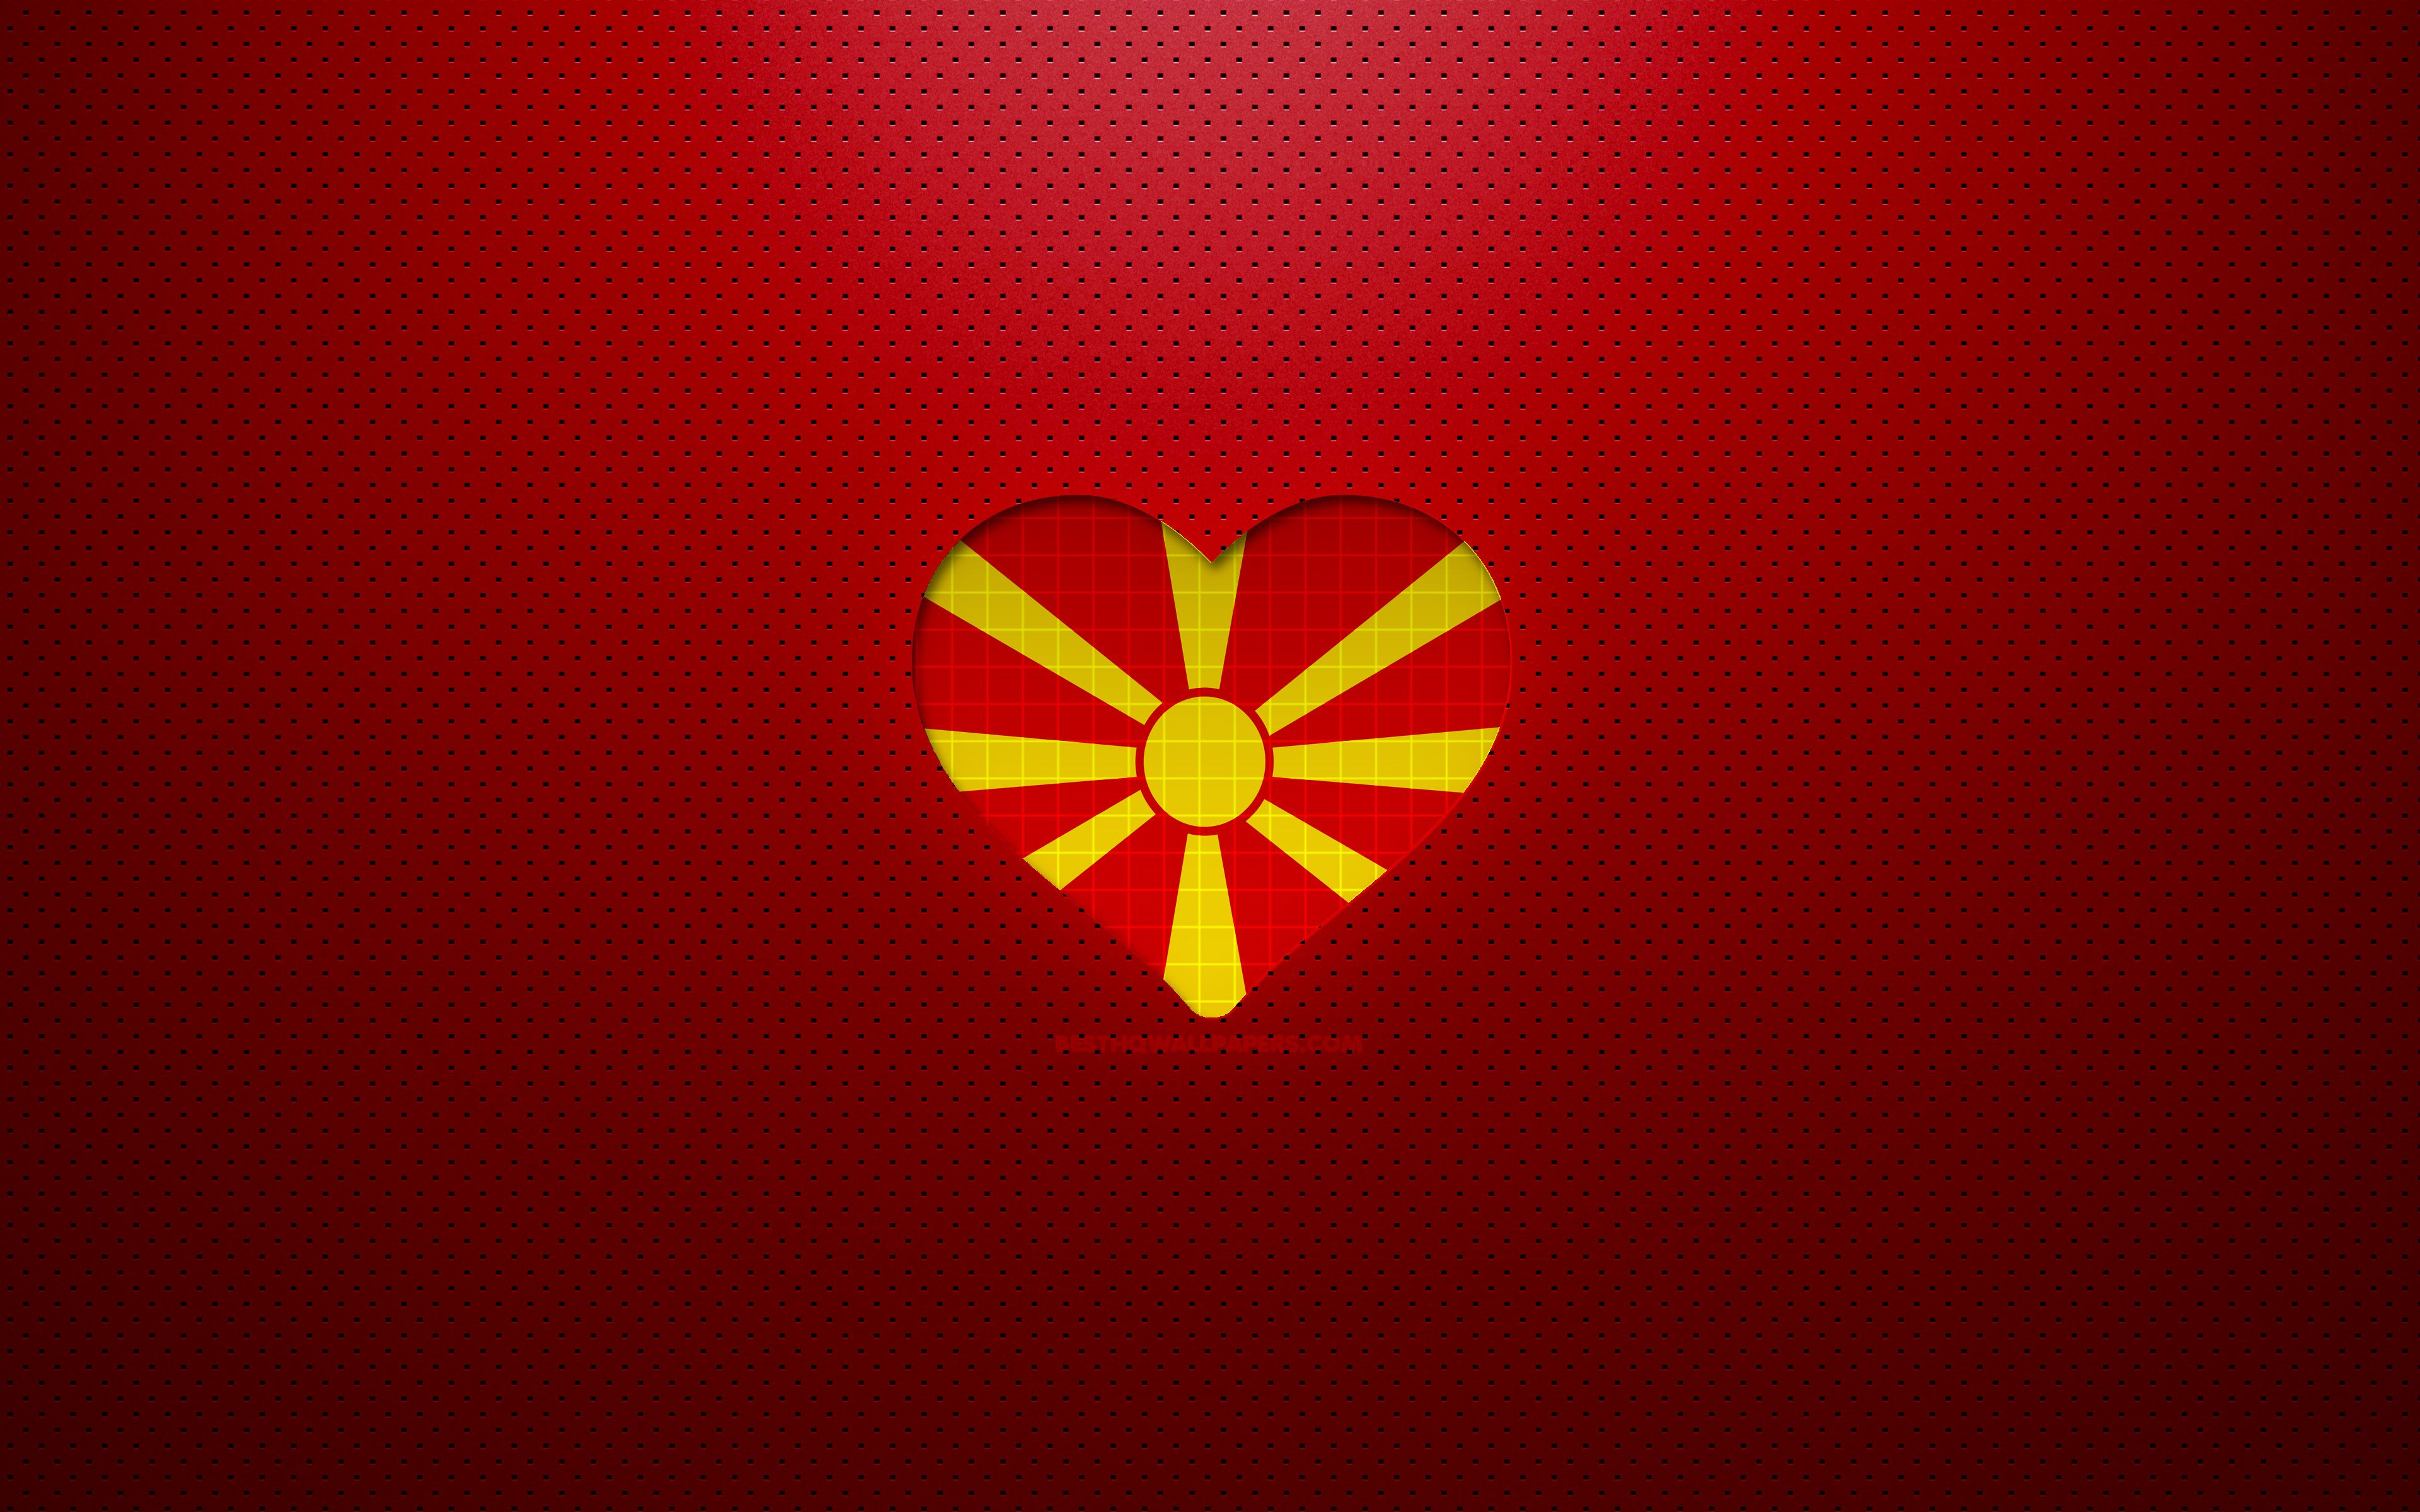 Download wallpaper I Love North Macedonia, 4k, Europe, red dotted background, Macedonian flag heart, North Macedonia, favorite countries, Love North Macedonia, Macedonian flag for desktop with resolution 3840x2400. High Quality HD picture